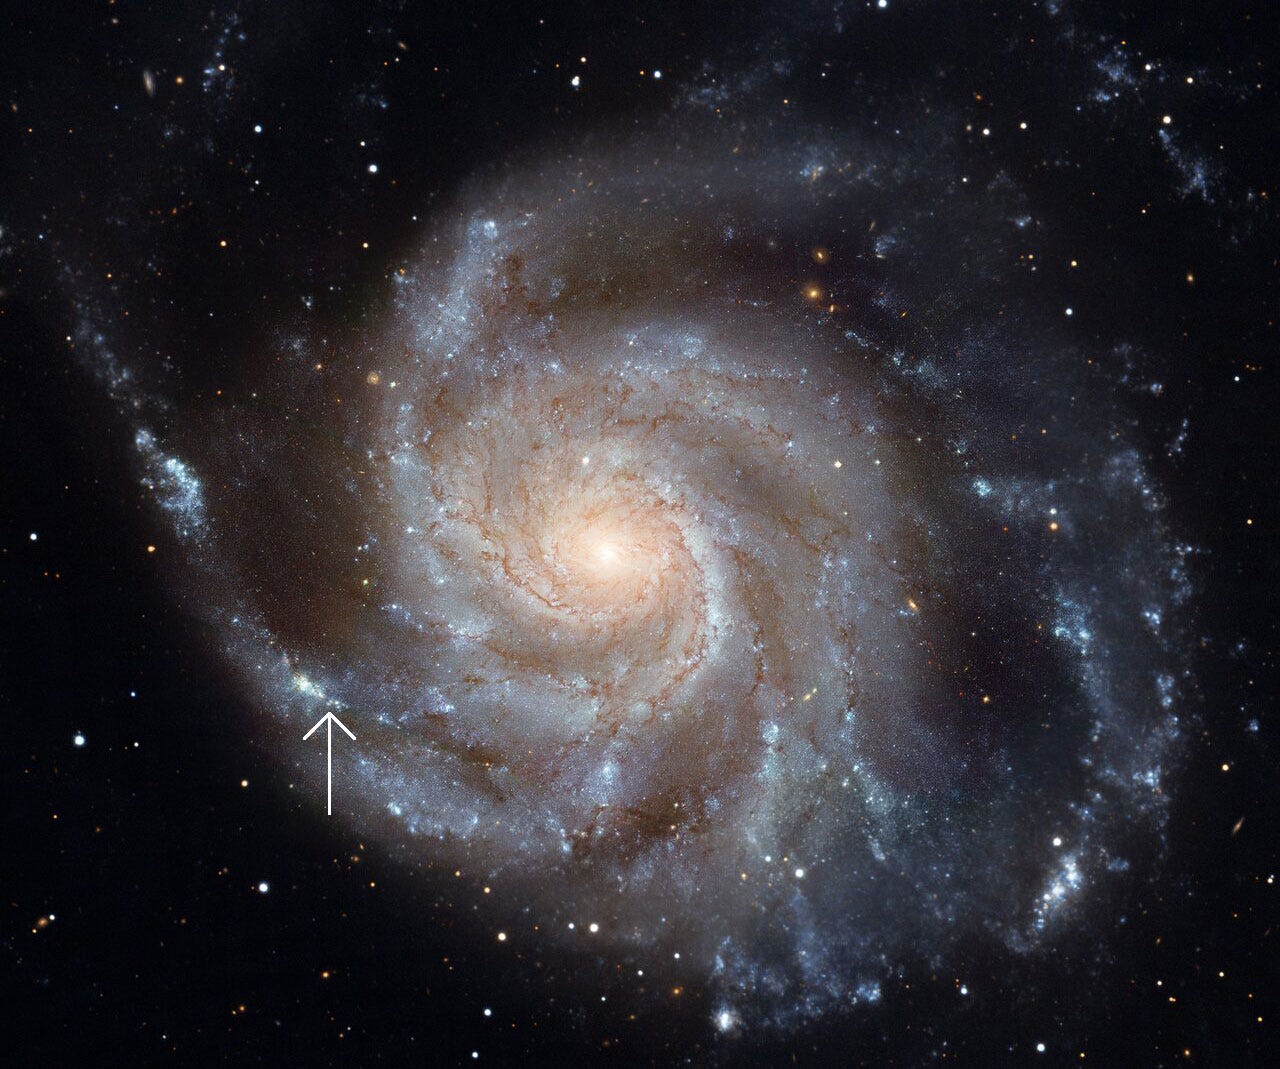 Image of a face-on spiral galaxy with several pinwheel-like arms radiating away from a bright center. Hundreds of stars are visible in the black background, and a white arrow shows where the supernova went off in one of the spiral arms